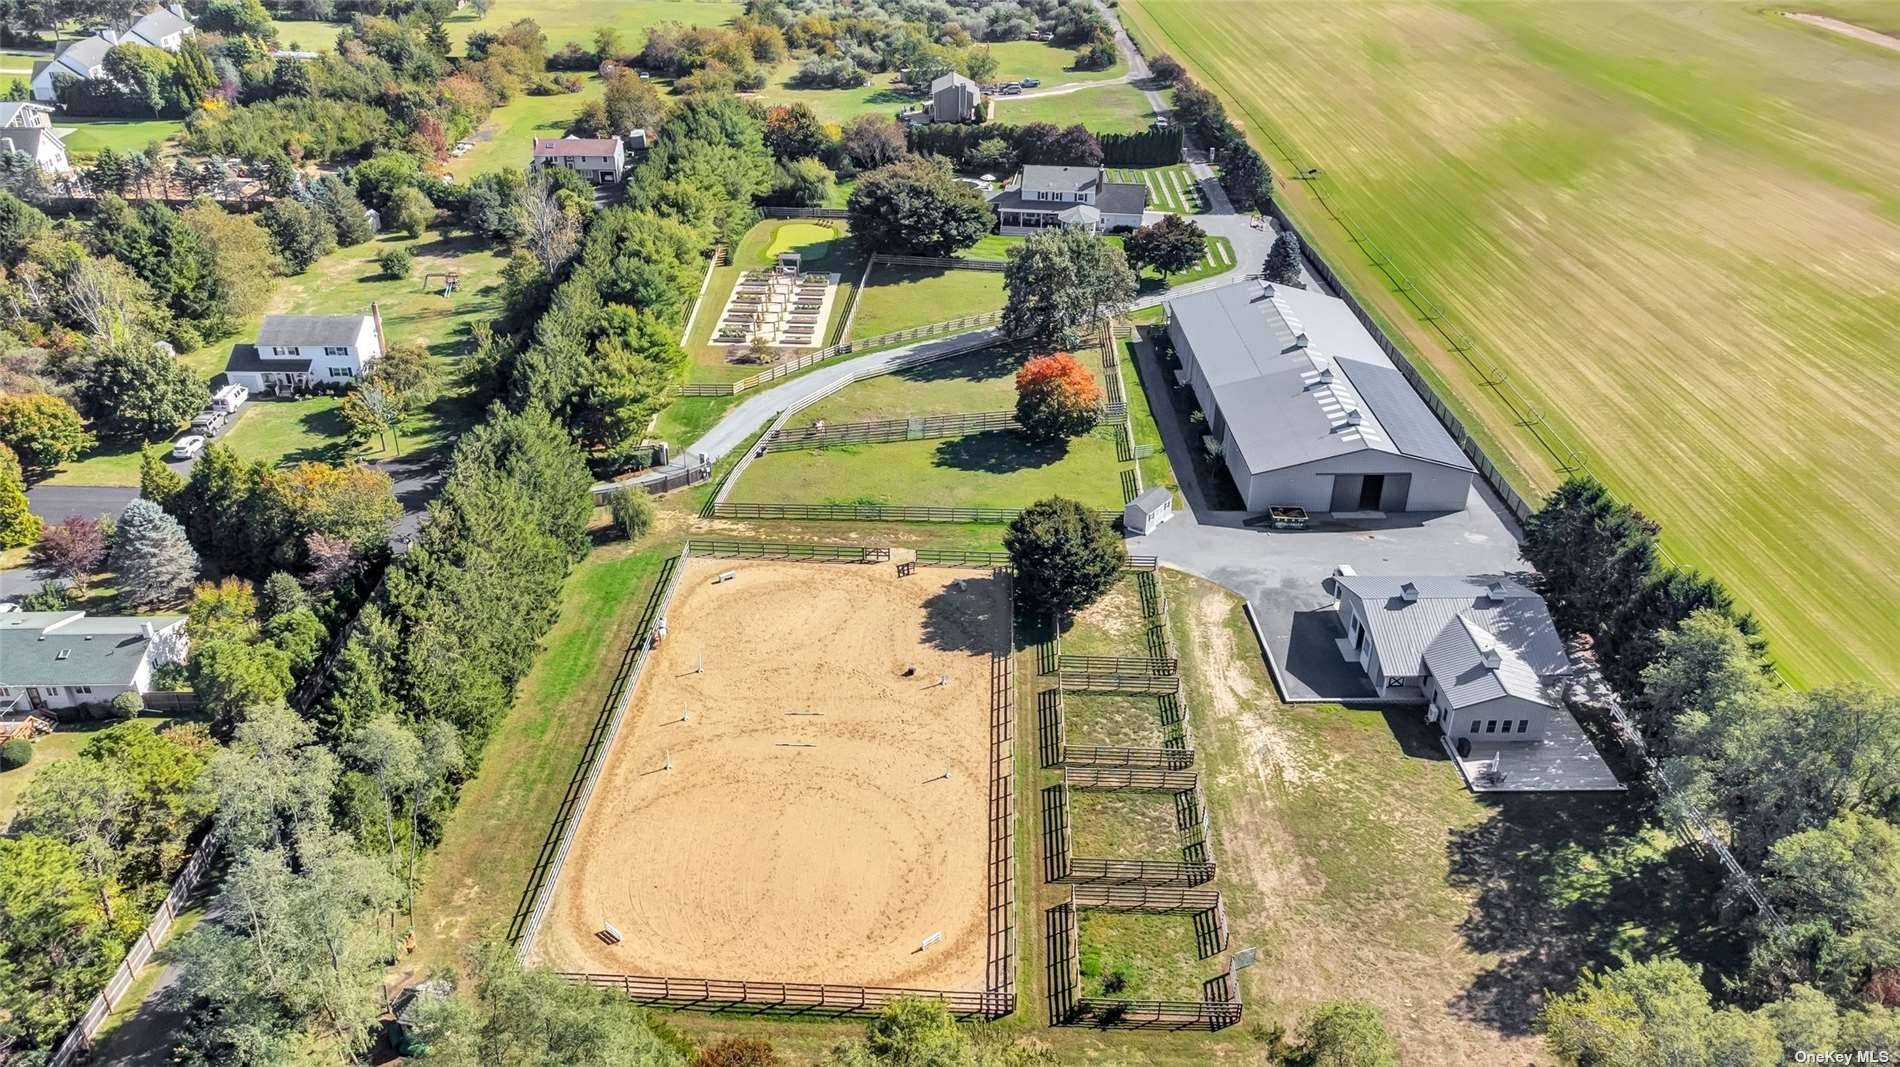 Starry Nights Farms This Stunning, Secluded, Gated, and Peaceful 6 Acre Estate is perfectly located amongst luscious green fields, farms, wineries, and amazing restaurants and shops in the heart of ...